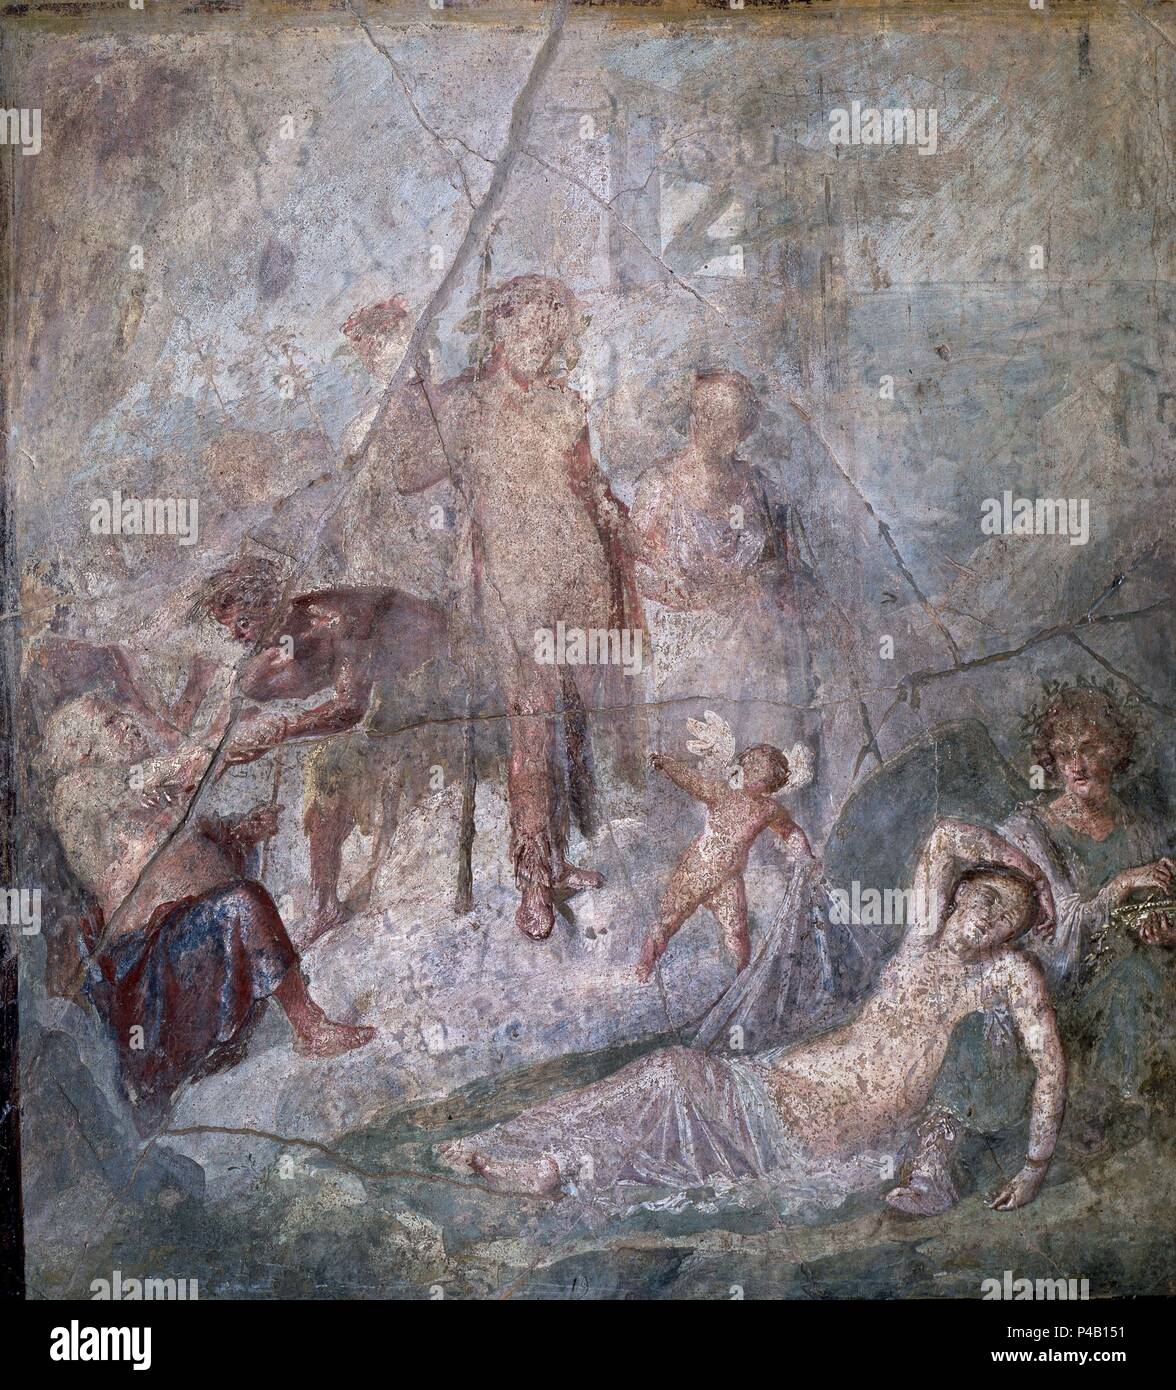 Ariadne and Dionysus in Naxos. Fresco from Pompei. Naples, museo archeologico nazionale di Napoli. Location: NATIONAL MUSEUM OF ARCHAEOLOGY, NEAPEL, ITALIA. Stock Photo